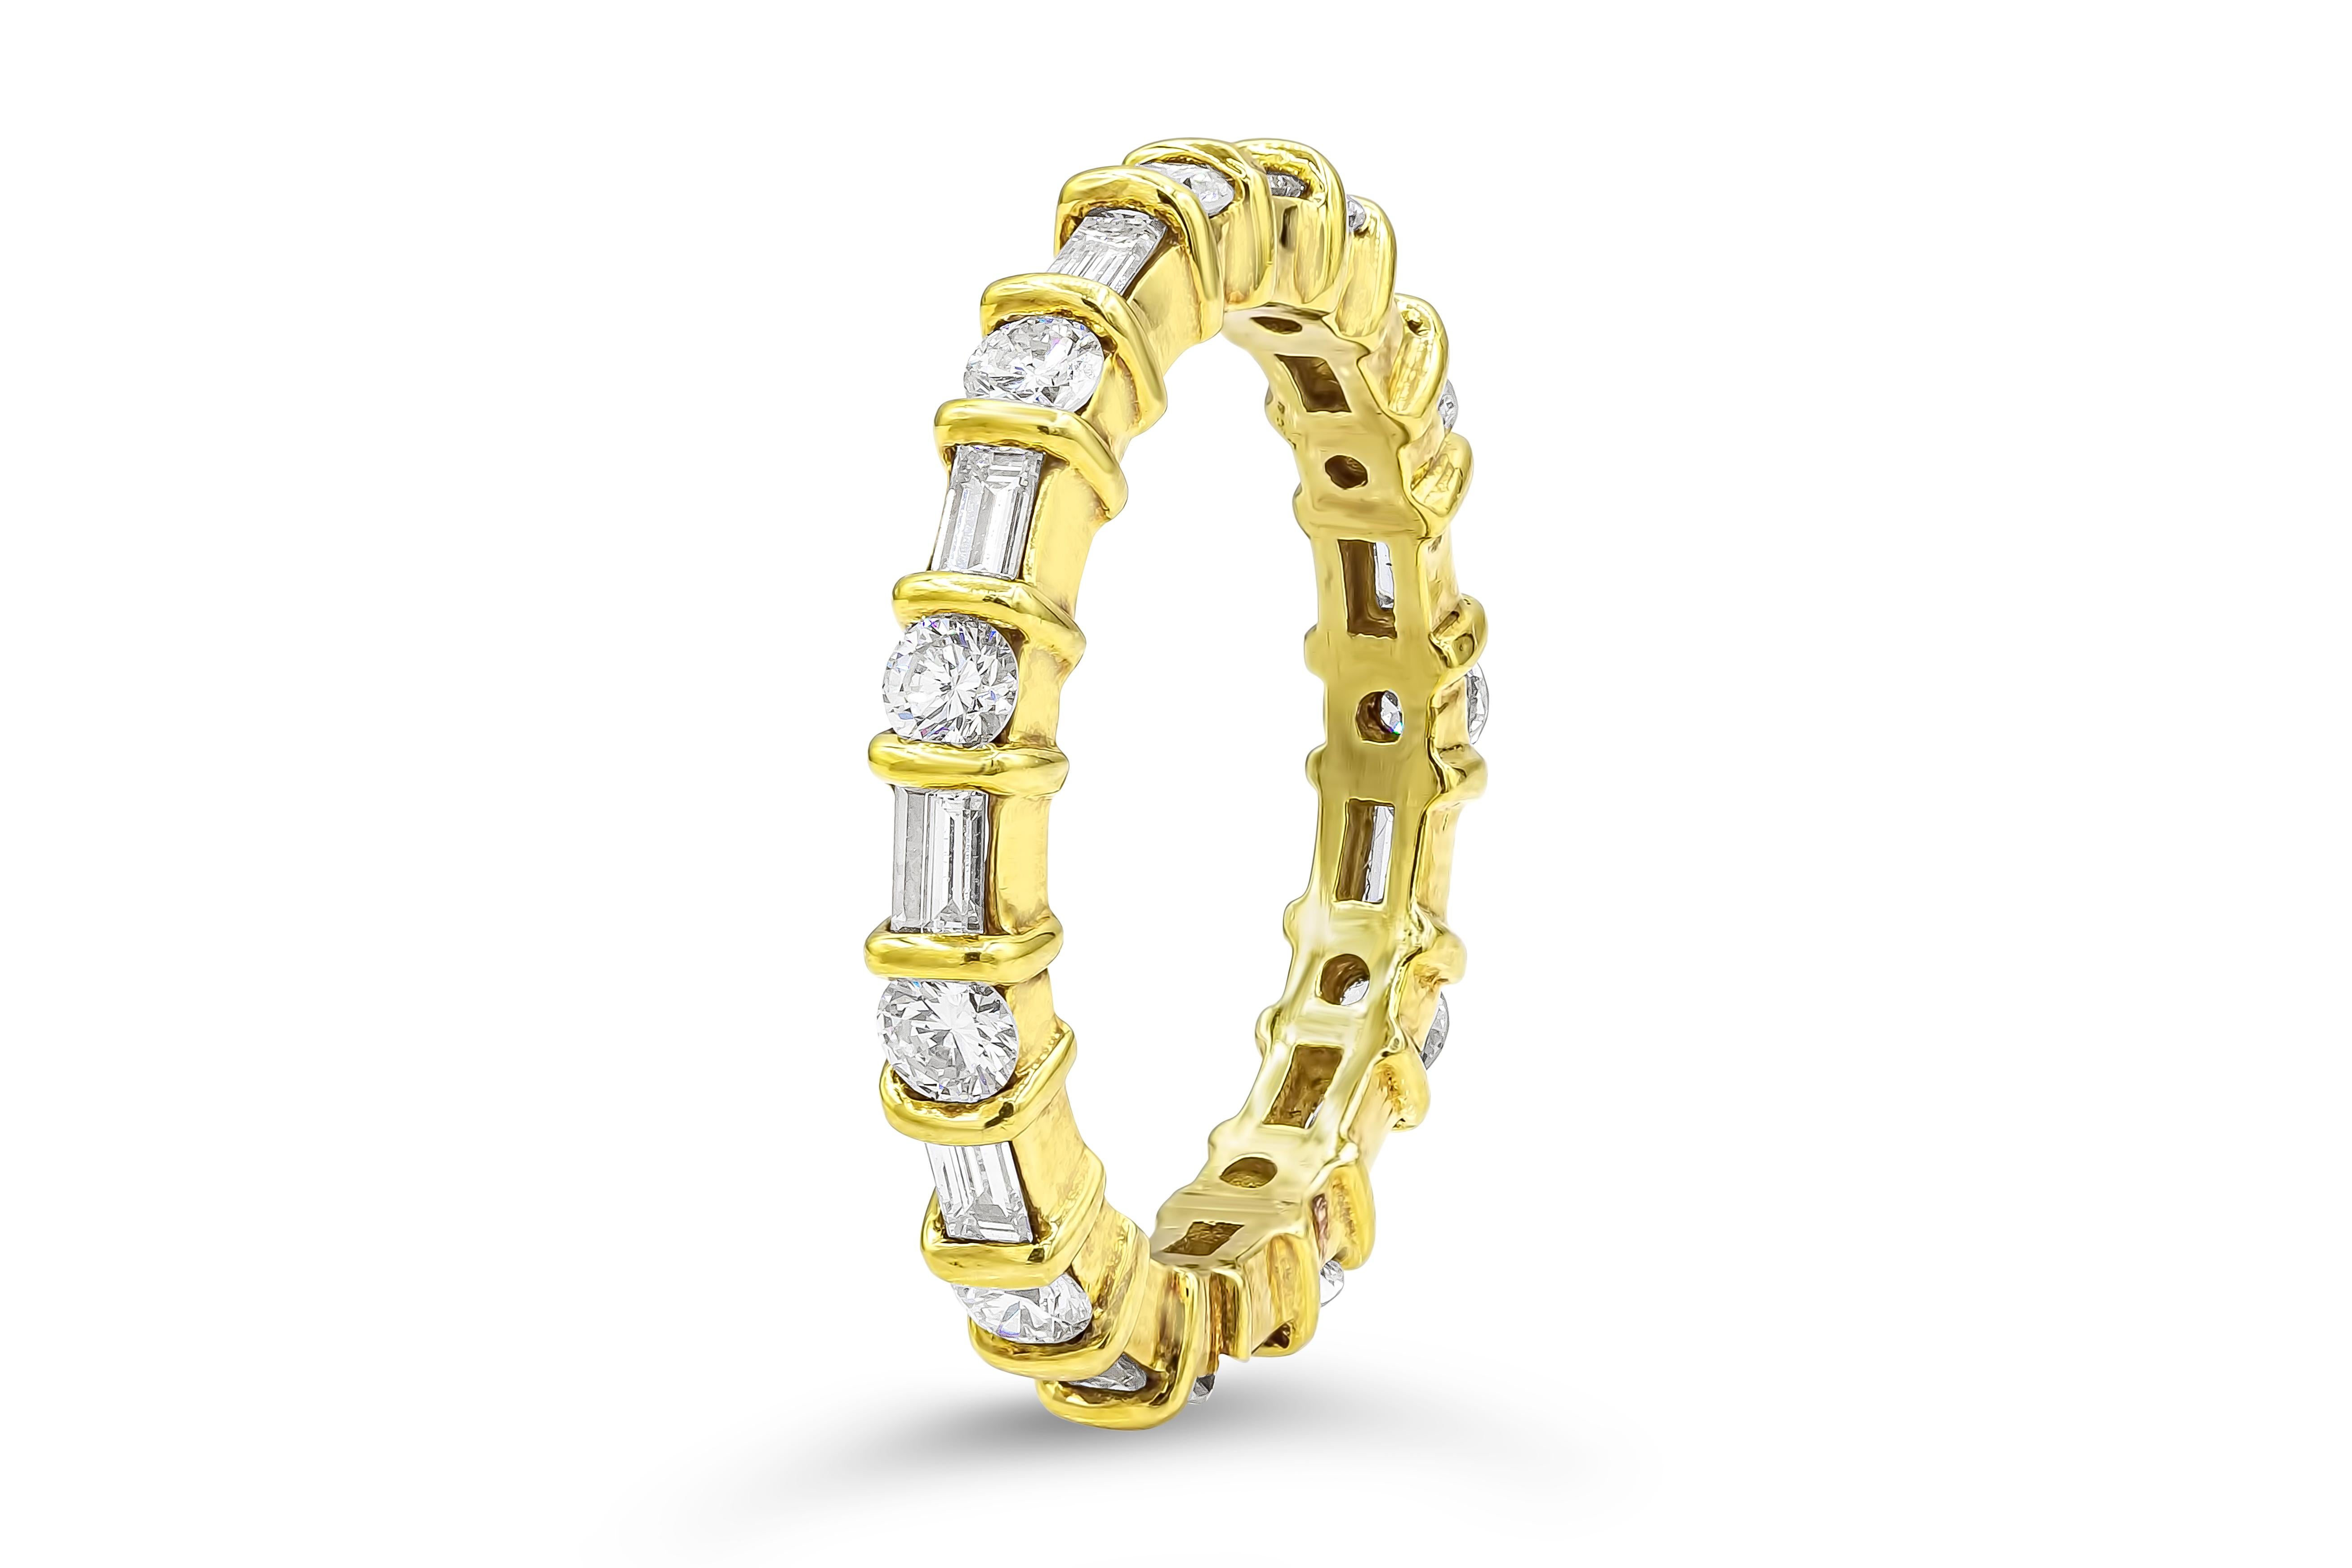 A unique wedding band showcasing alternating round and baguette diamonds. Round diamonds weigh 0.78 carat total and baguette diamonds weighing 0.72 carats total. Made with 14K Yellow Gold. Size 7.75 US. Perfect for your everyday use.

Roman Malakov